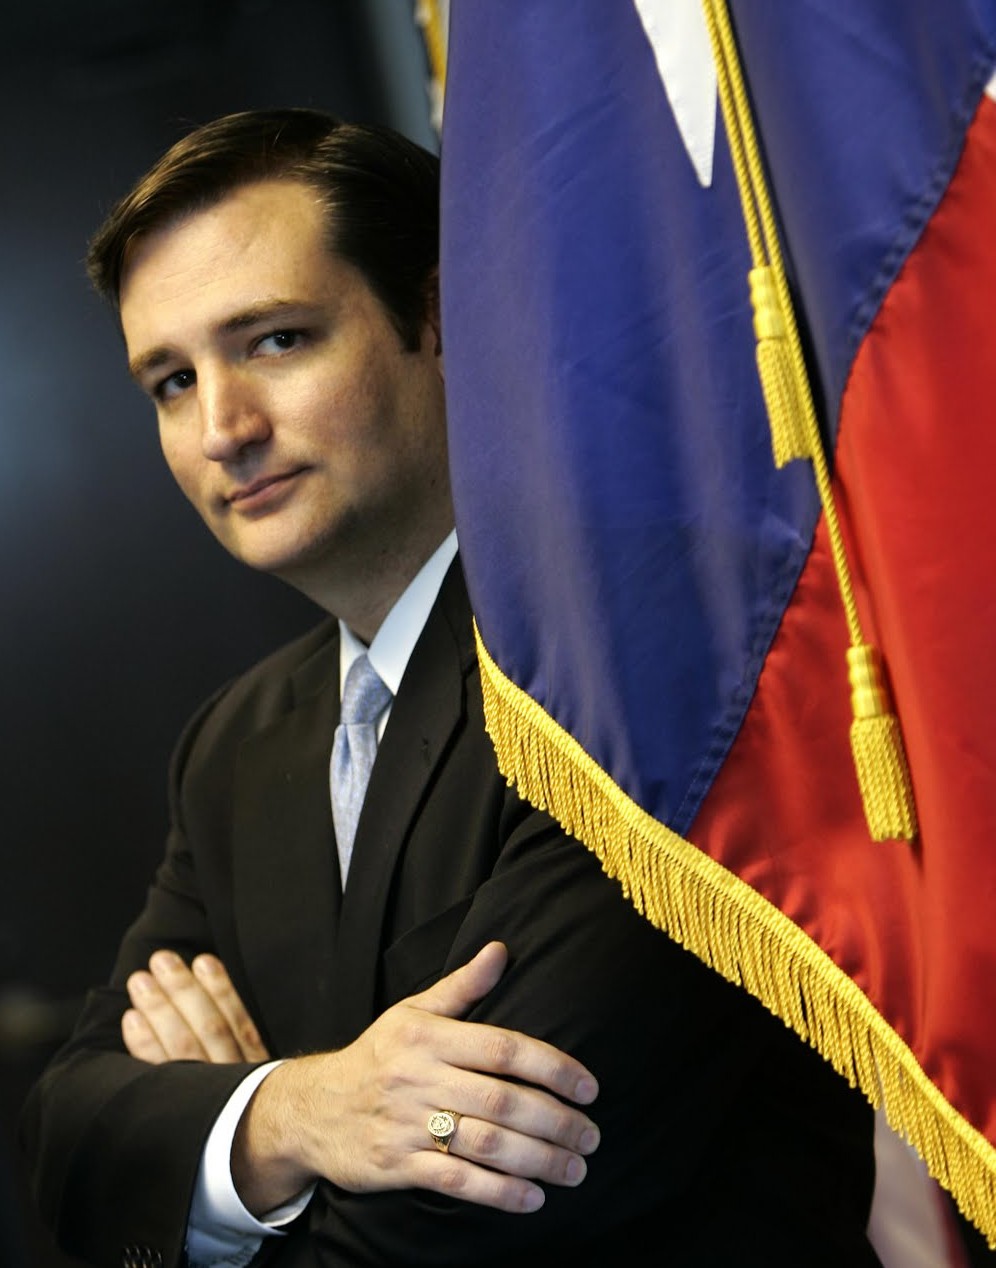 Mark Levin interviews Sen. Ted Cruz about his new book and other topics